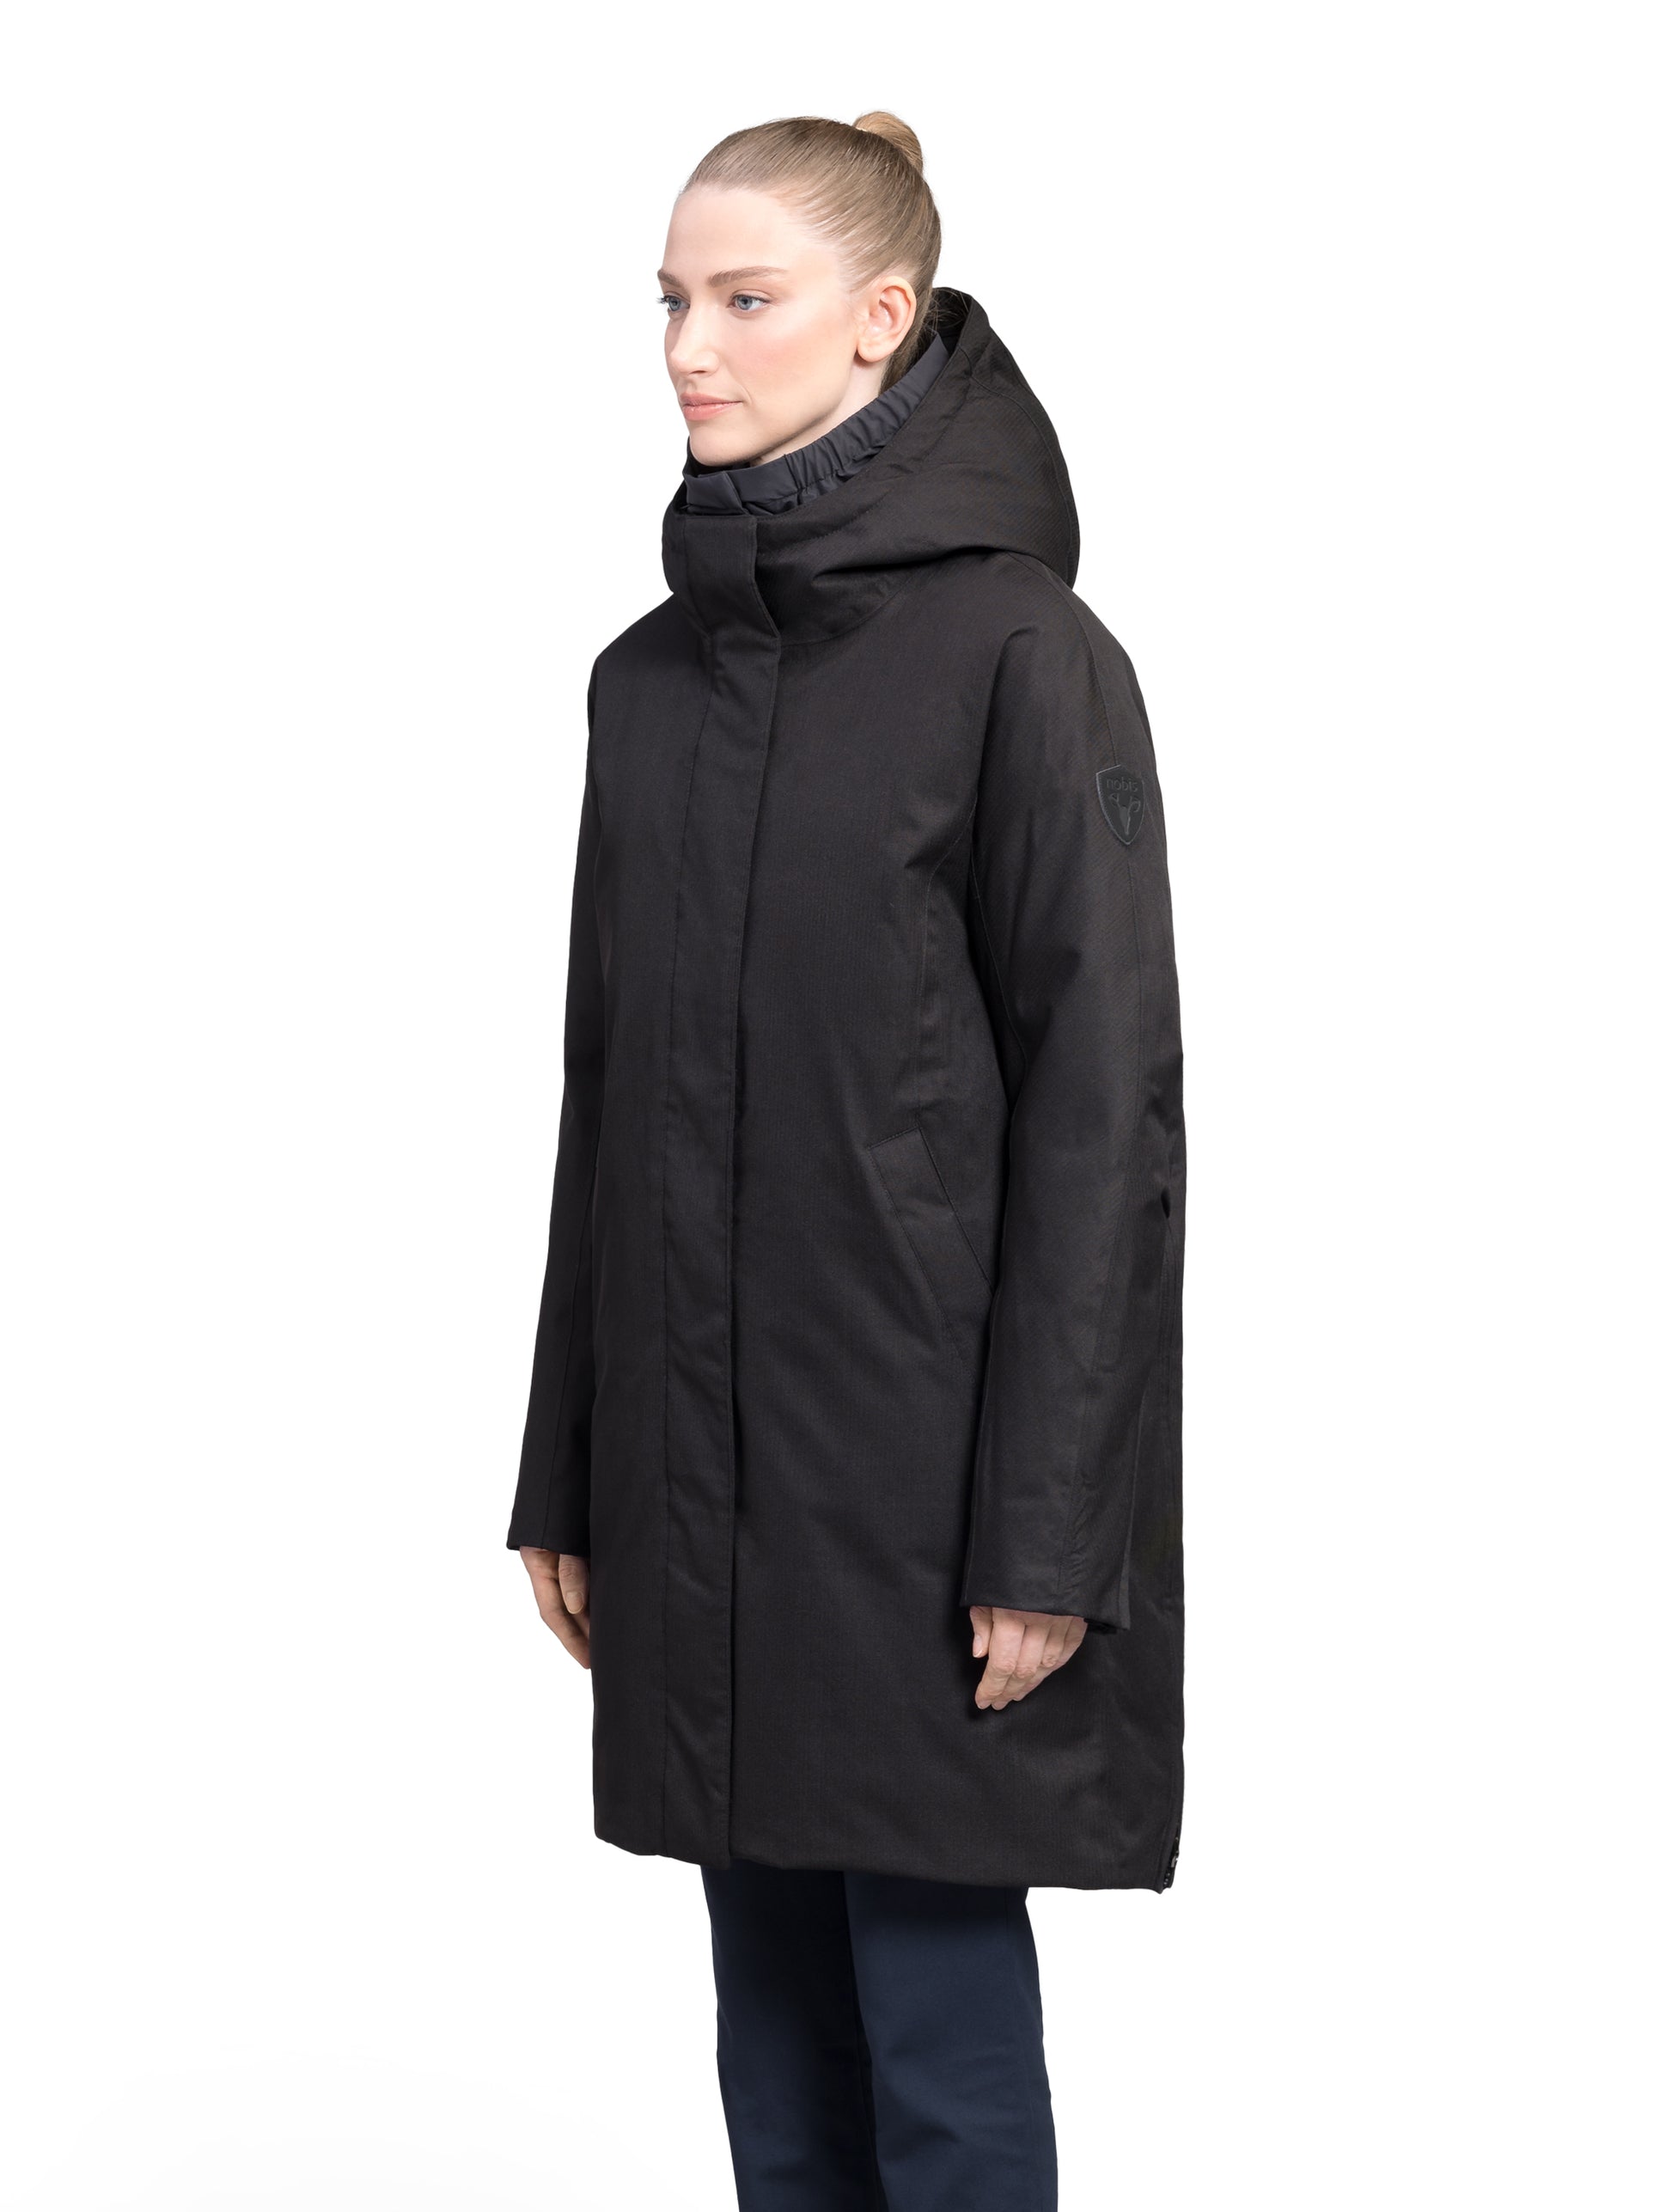 Dory Women's Tailored Back Zip Parka in knee length, premium Crosshatch fabrication, Premium Canadian White Duck Down insulation, non-removable down-filled hood, removable interior hood, centre front two-way zipper with wind flap, vertical zipper detailing along back, in Black